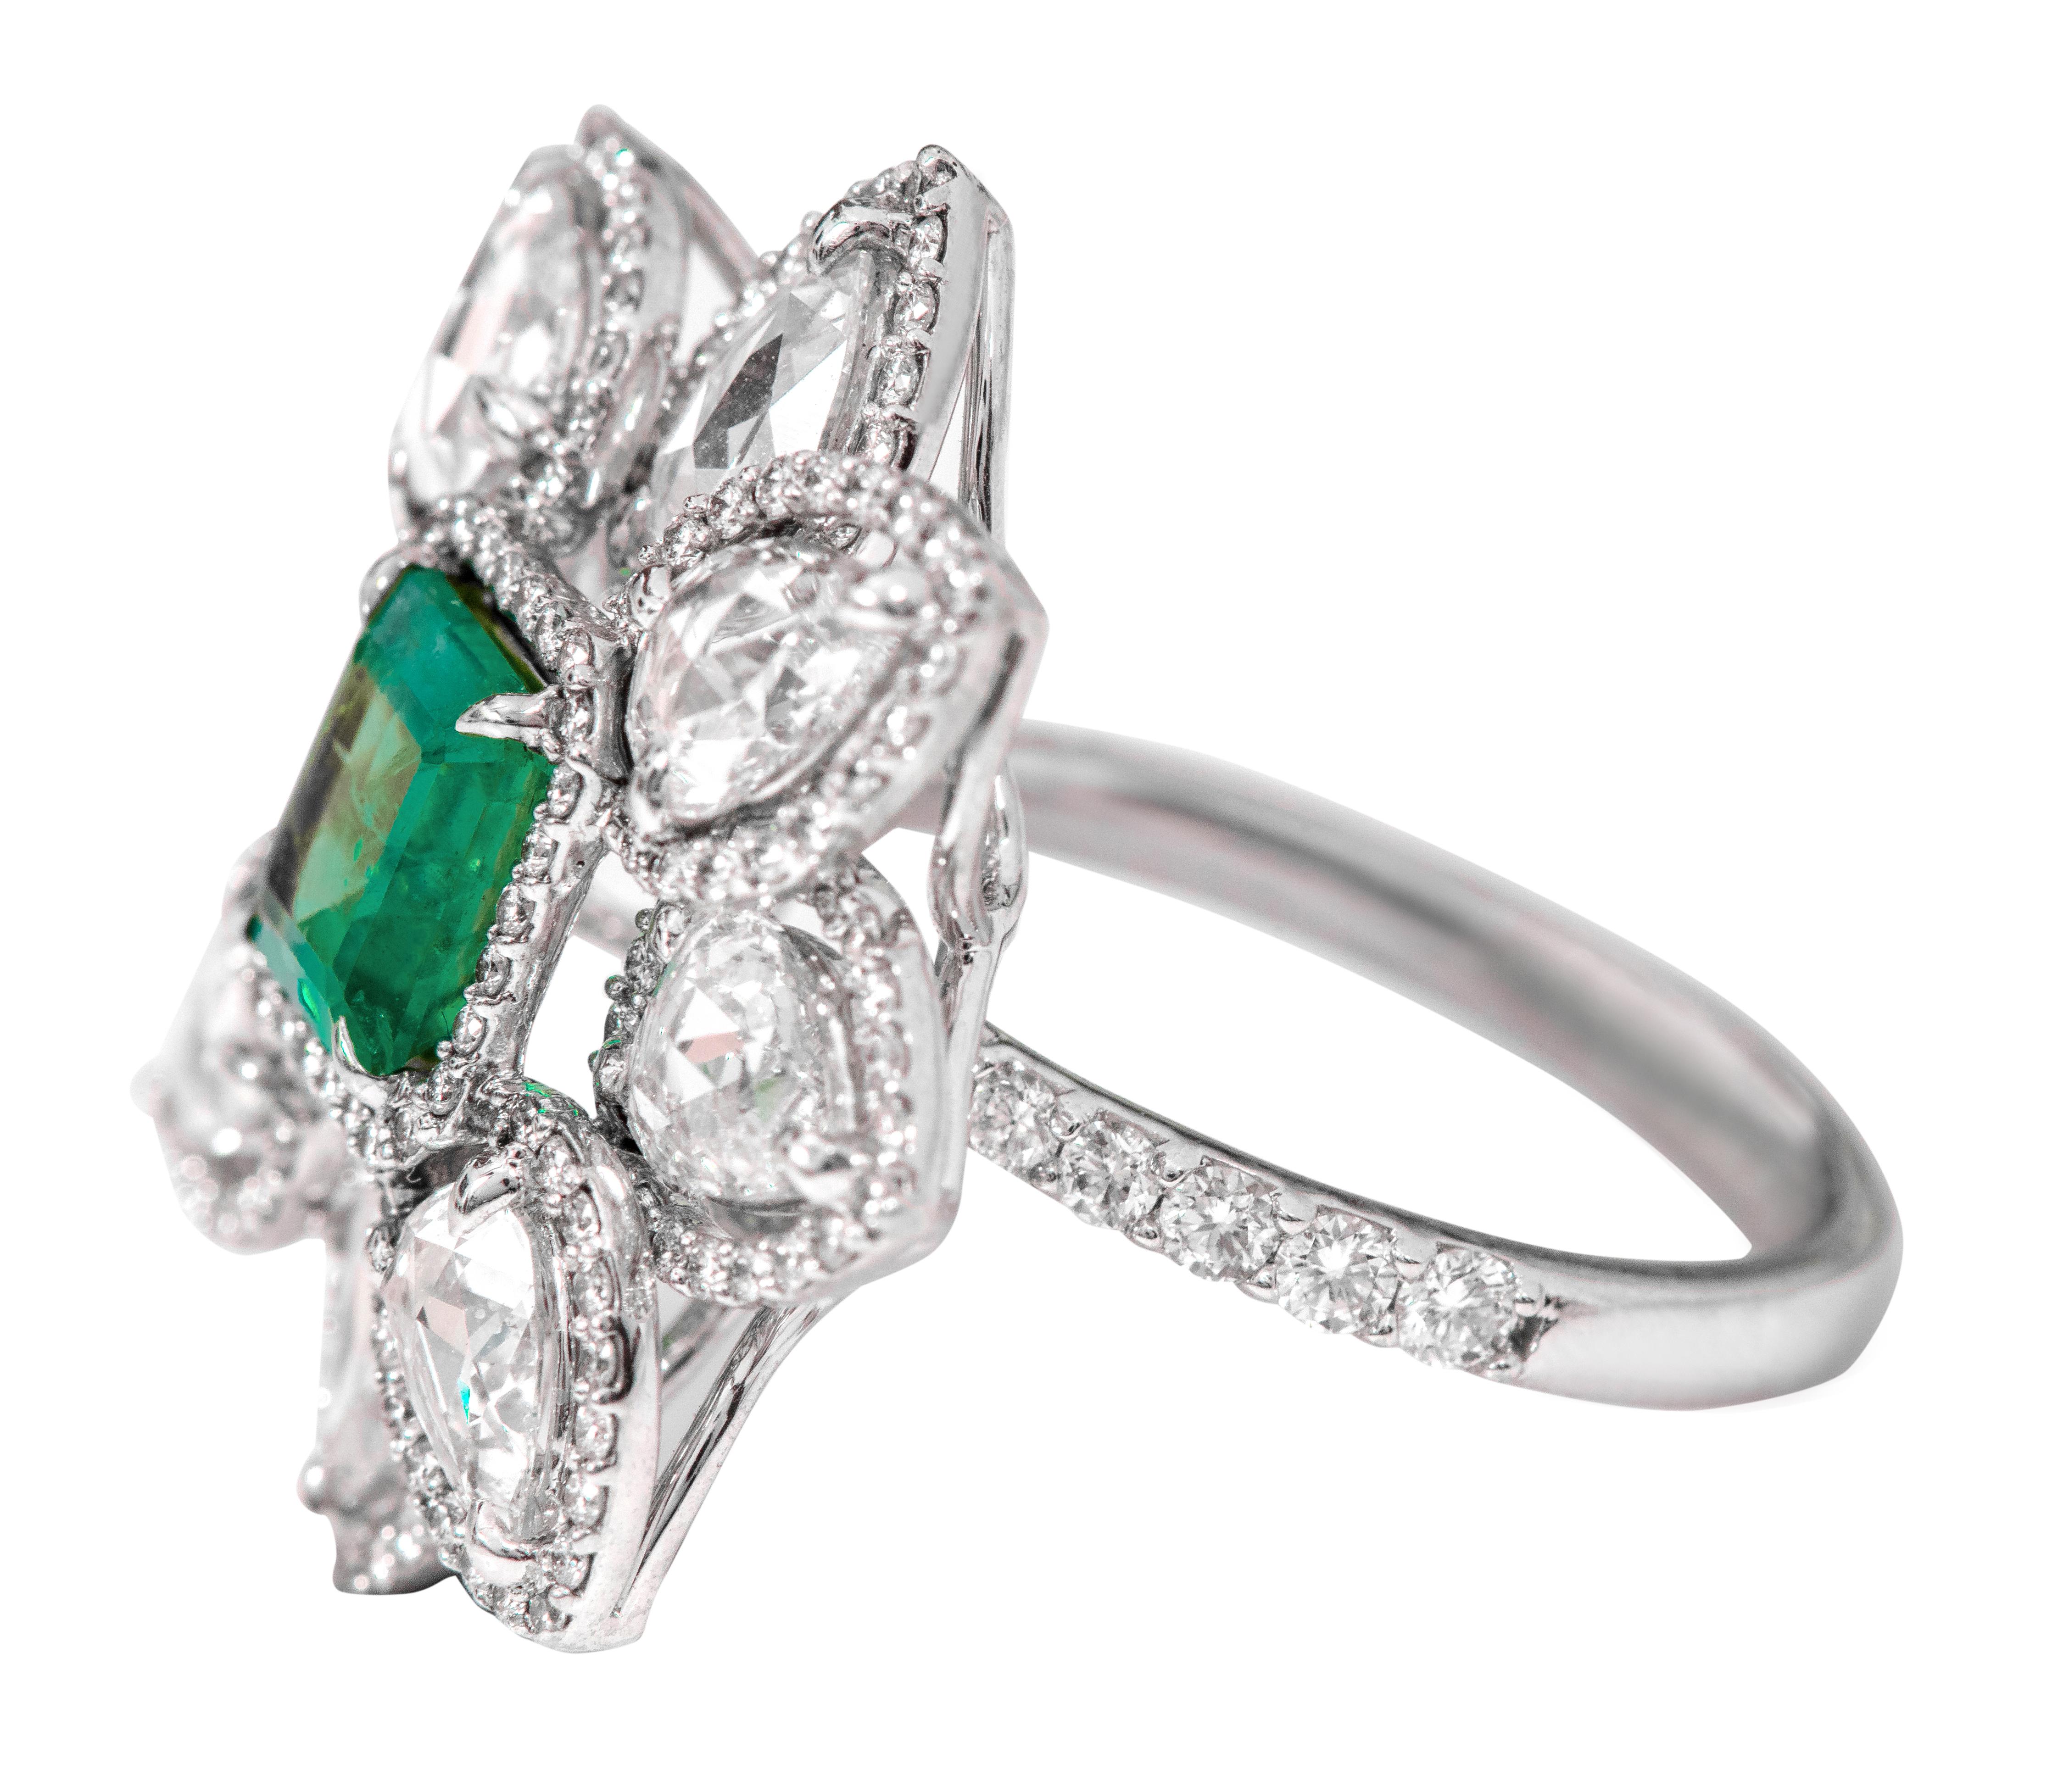 18 Karat White Gold 1.25 Carat Natural Emerald and Diamond Cluster Contemporary Ring 

This impressive vibrant green emerald and diamond rose-cut cocktail designer ring is majestic. The exquisite solitaire emerald cut emerald with a leveled down